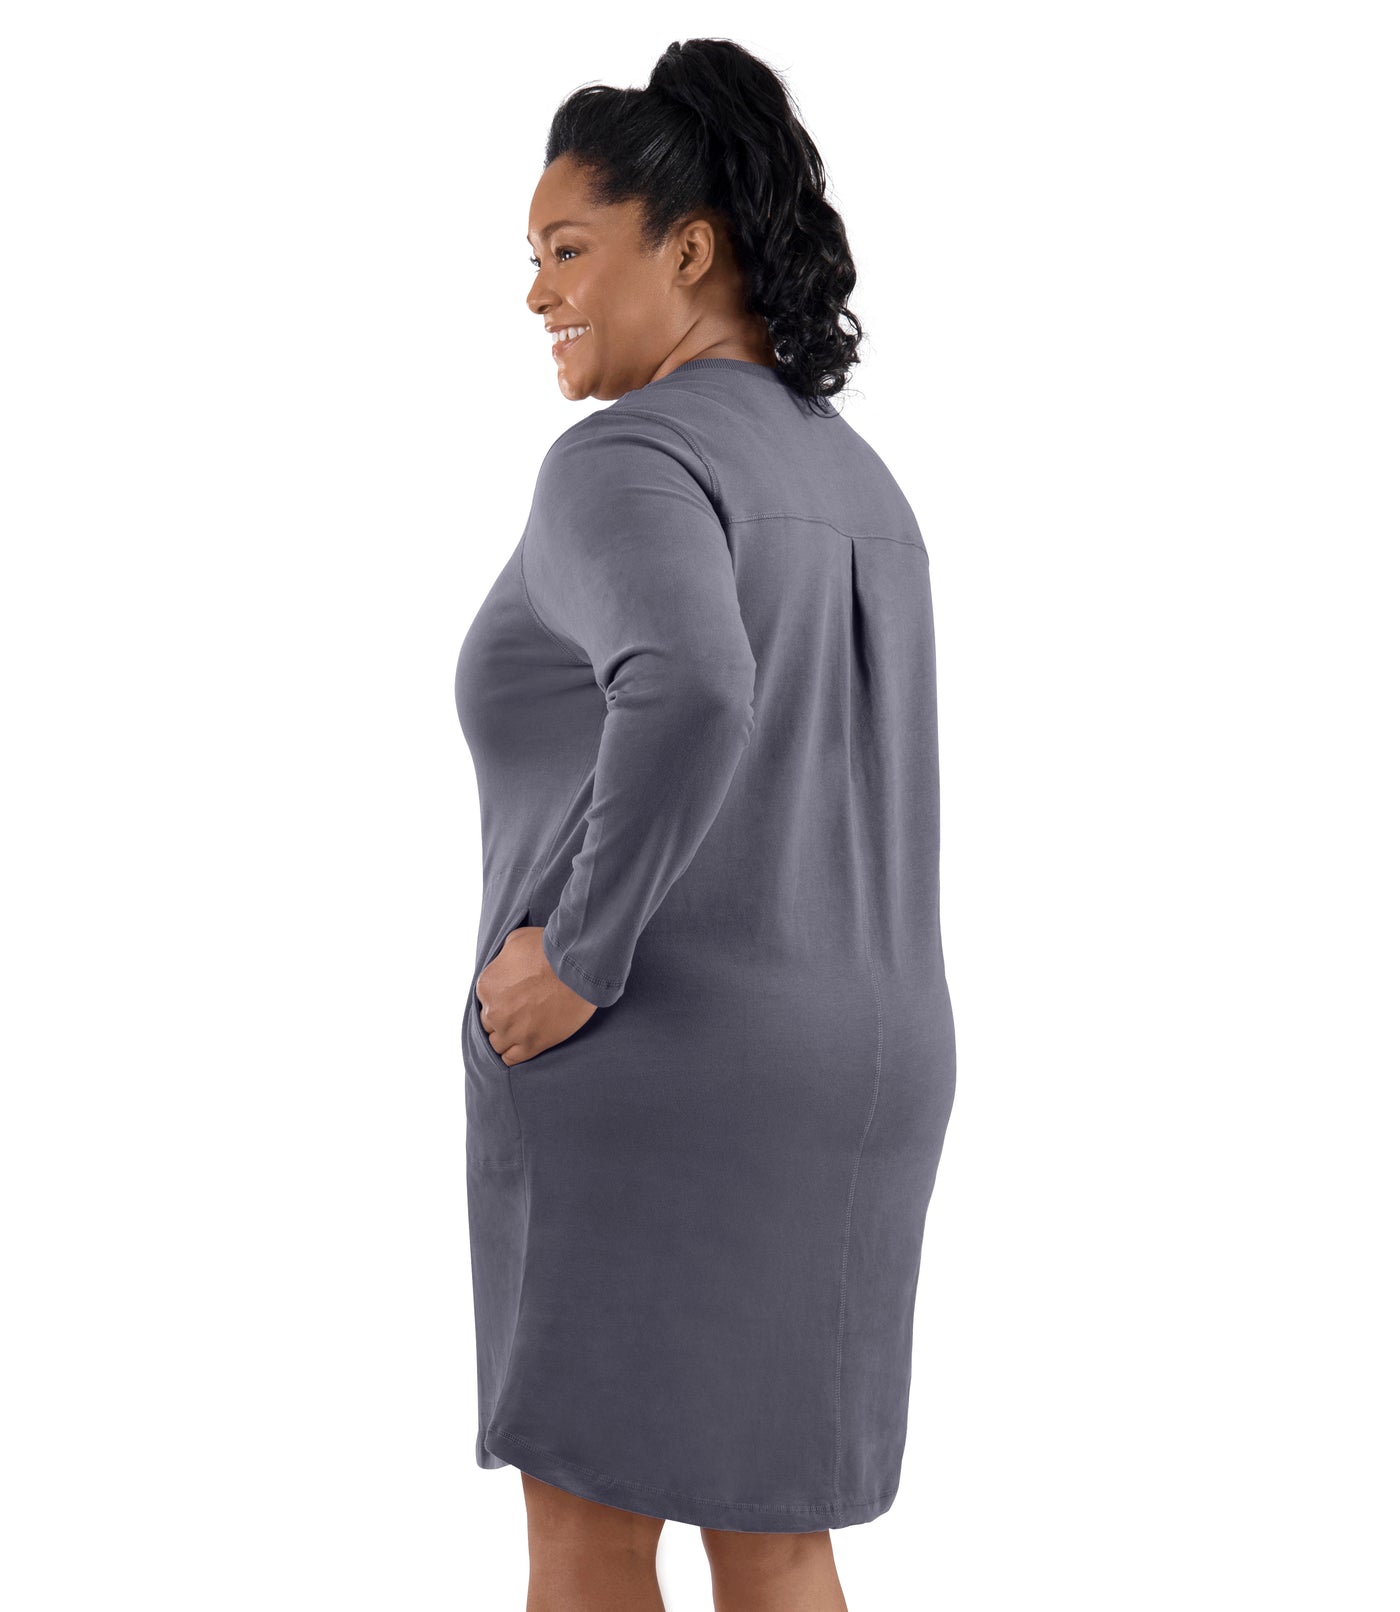 Plus-size model, facing back, left hand in dress pocket. Wearing JunoActive's Legacy Cotton Casual Pocketed Long Sleeve Dress in Misty Grey.